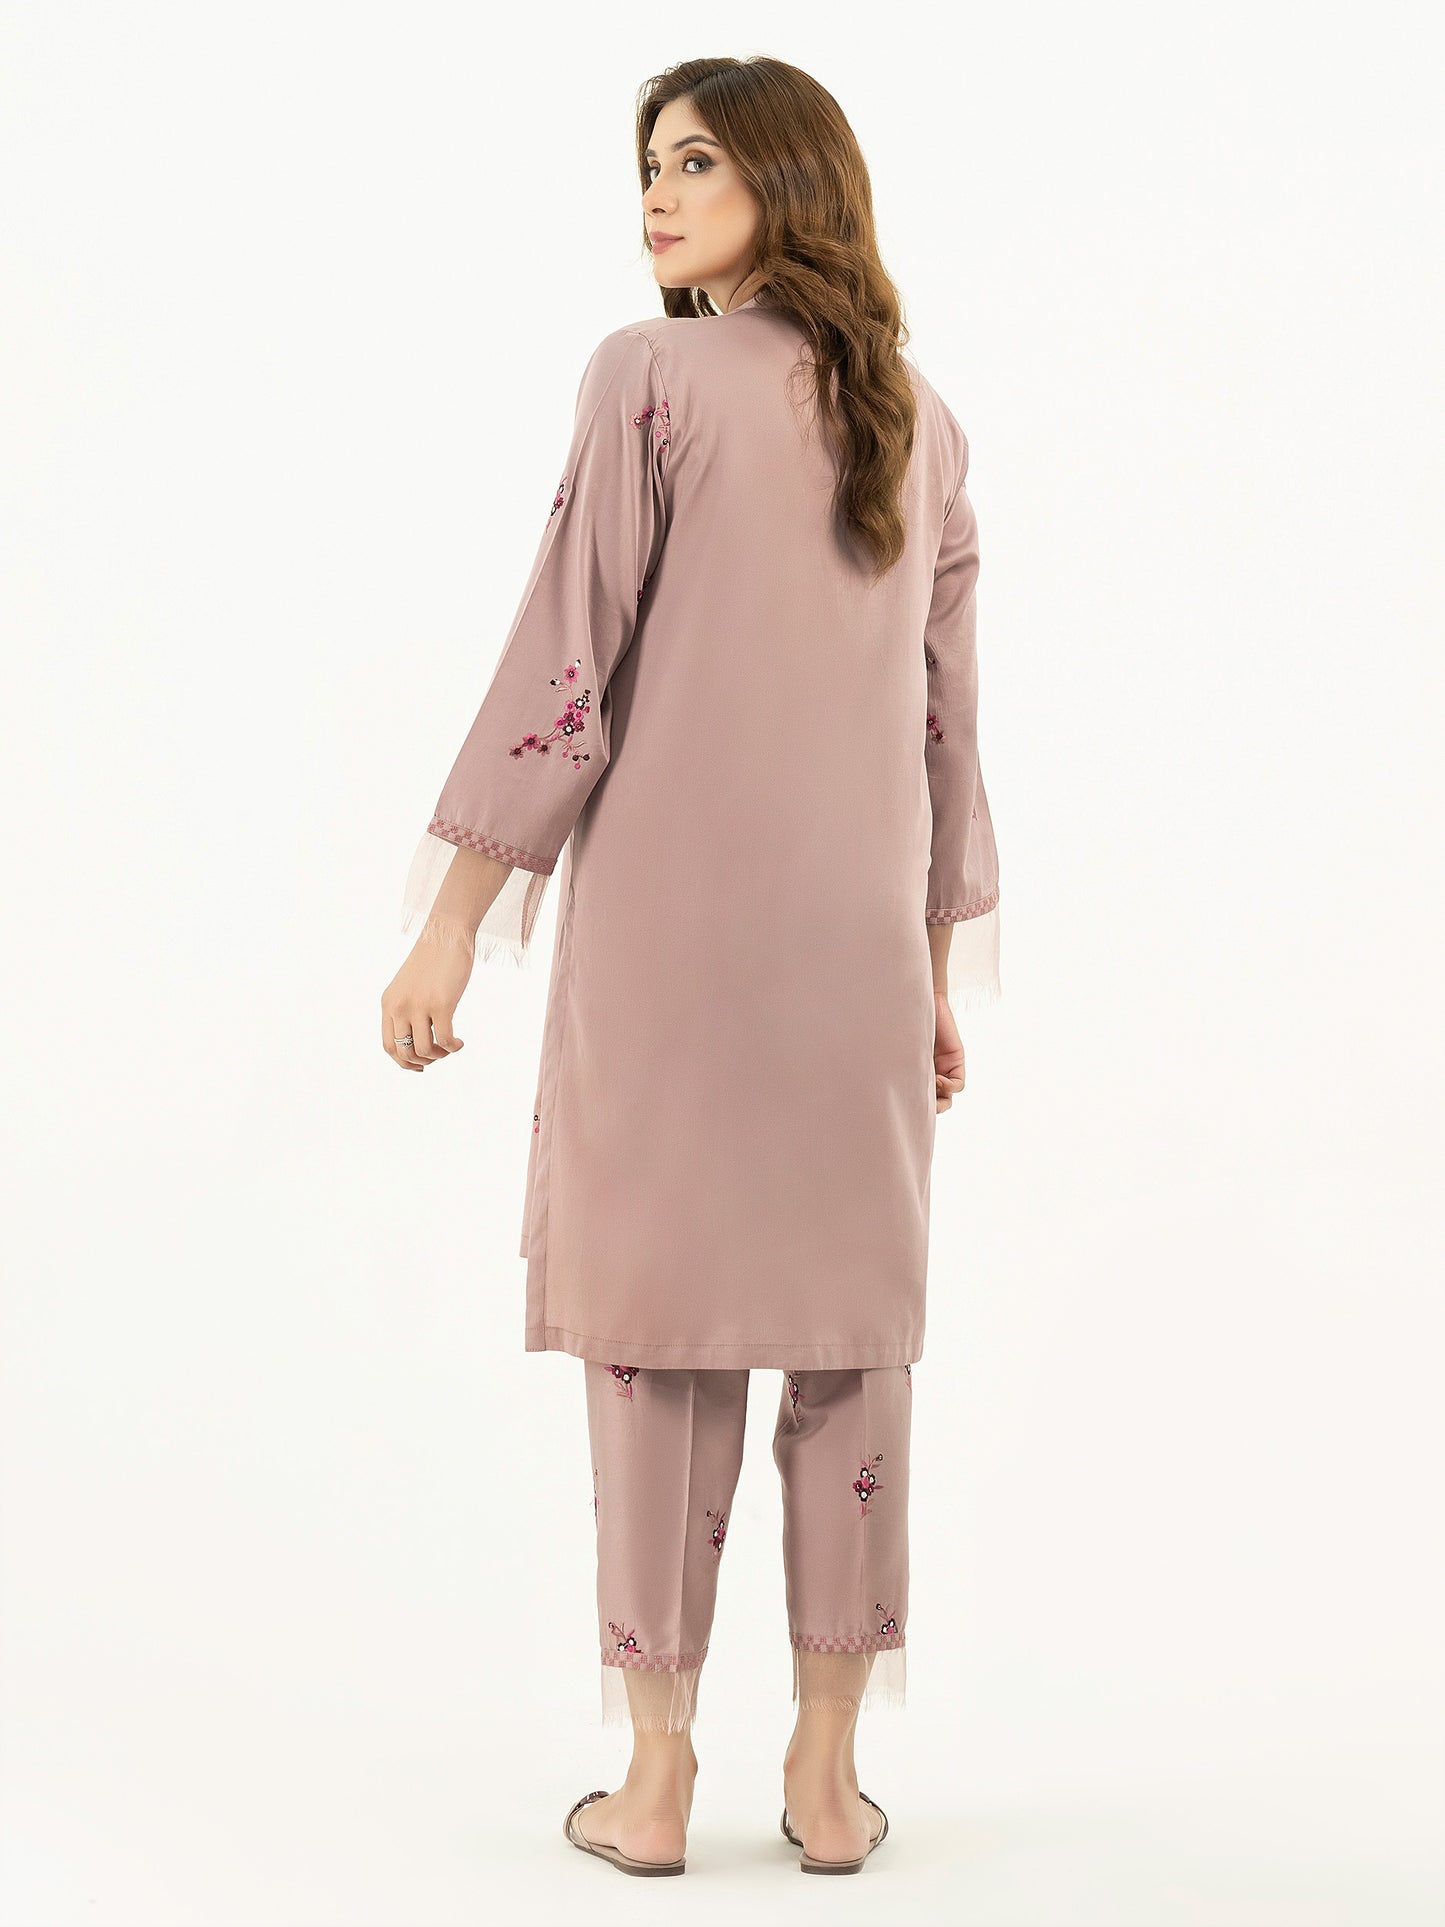 2 Piece Satin Suit-Embroidered  (Pret)